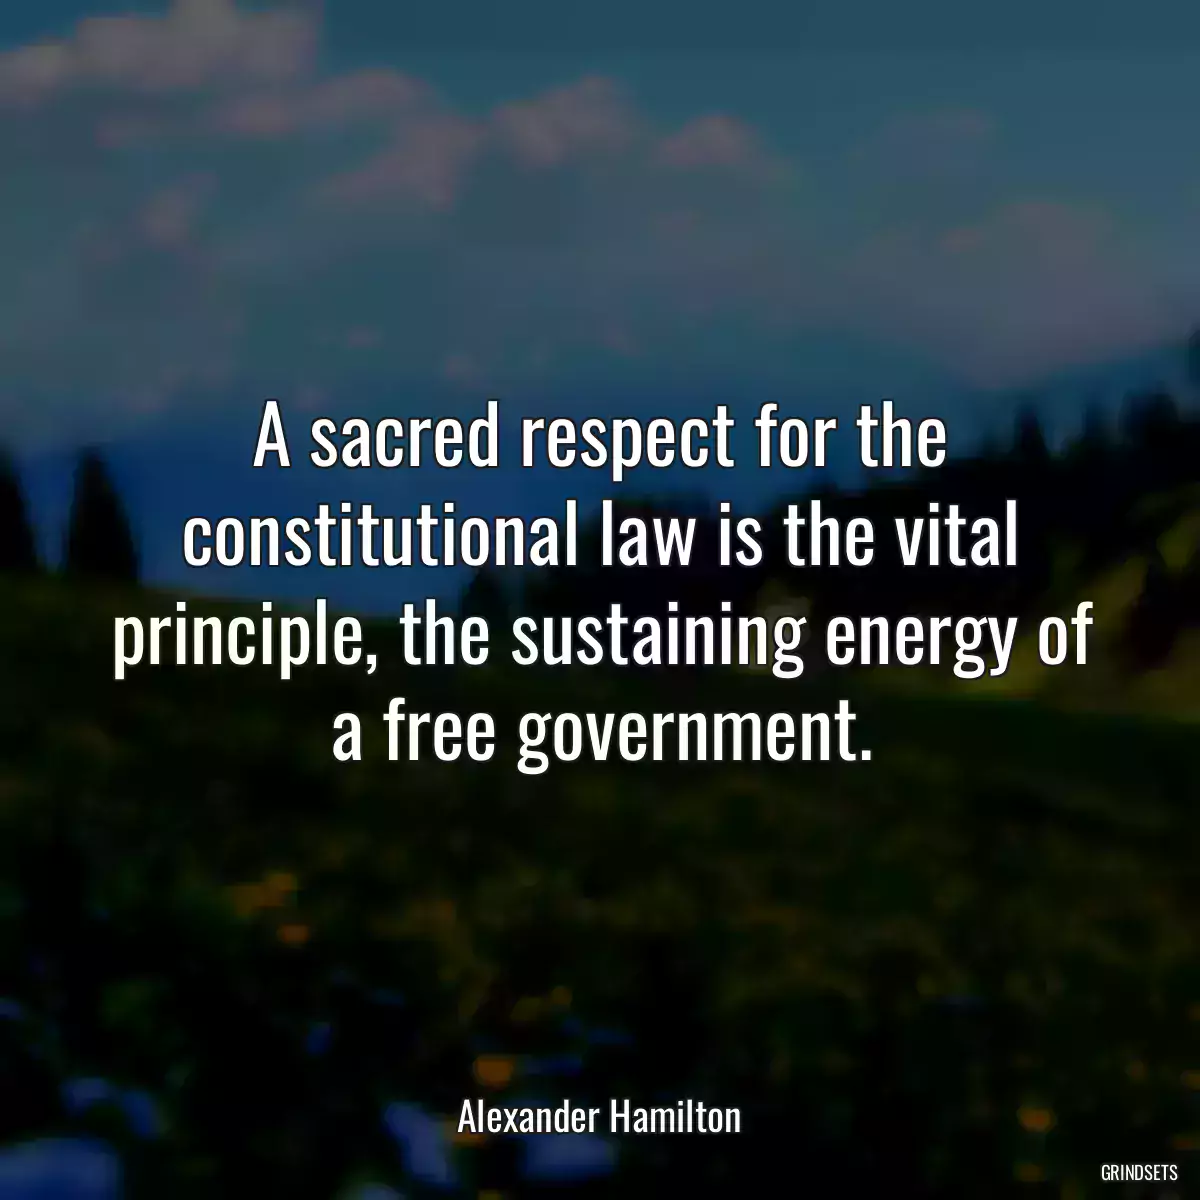 A sacred respect for the constitutional law is the vital principle, the sustaining energy of a free government.